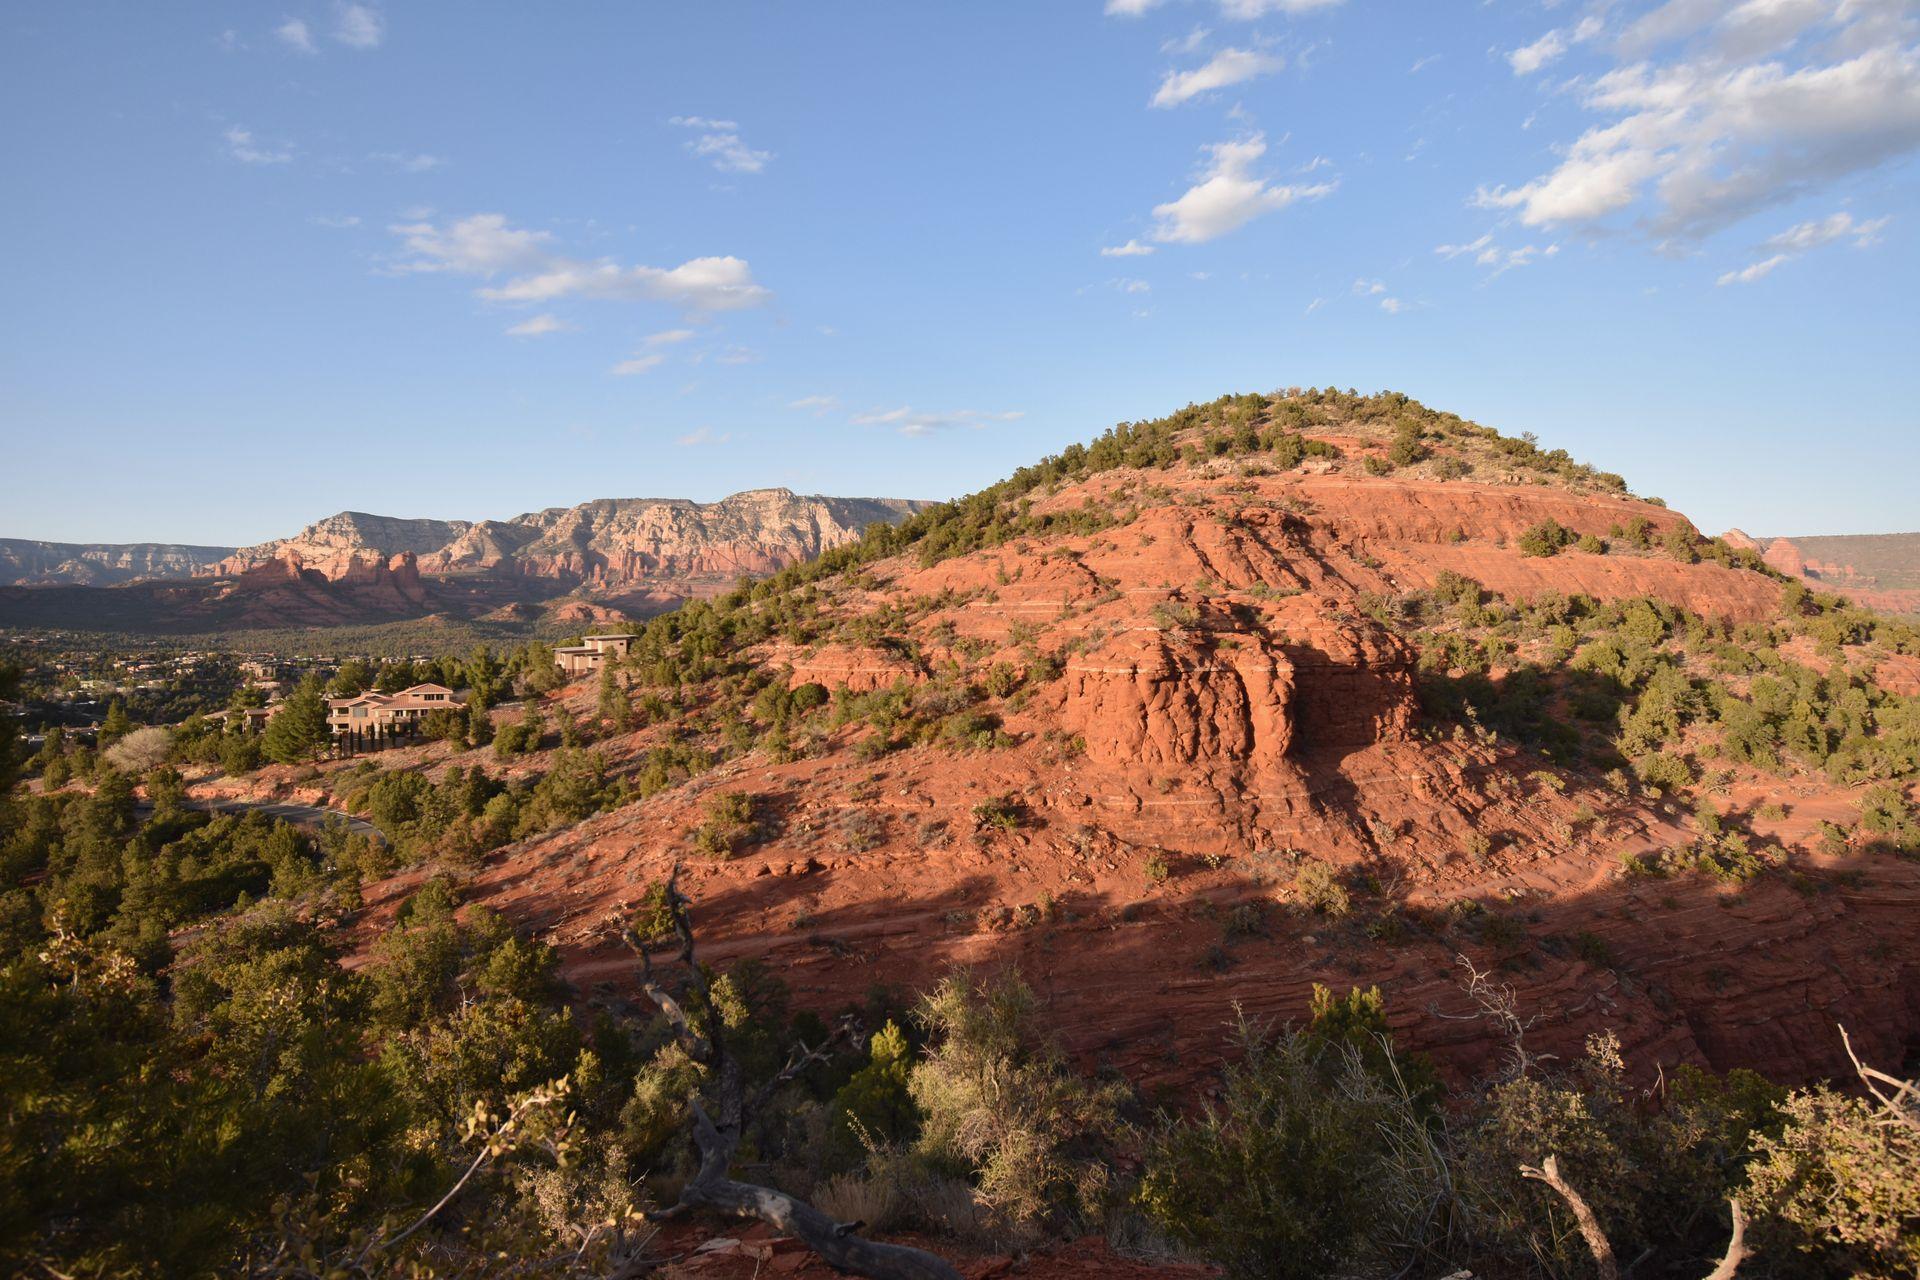 A small orange mountain next to the city of Sedona. There is a larger orange cliff in the distance.